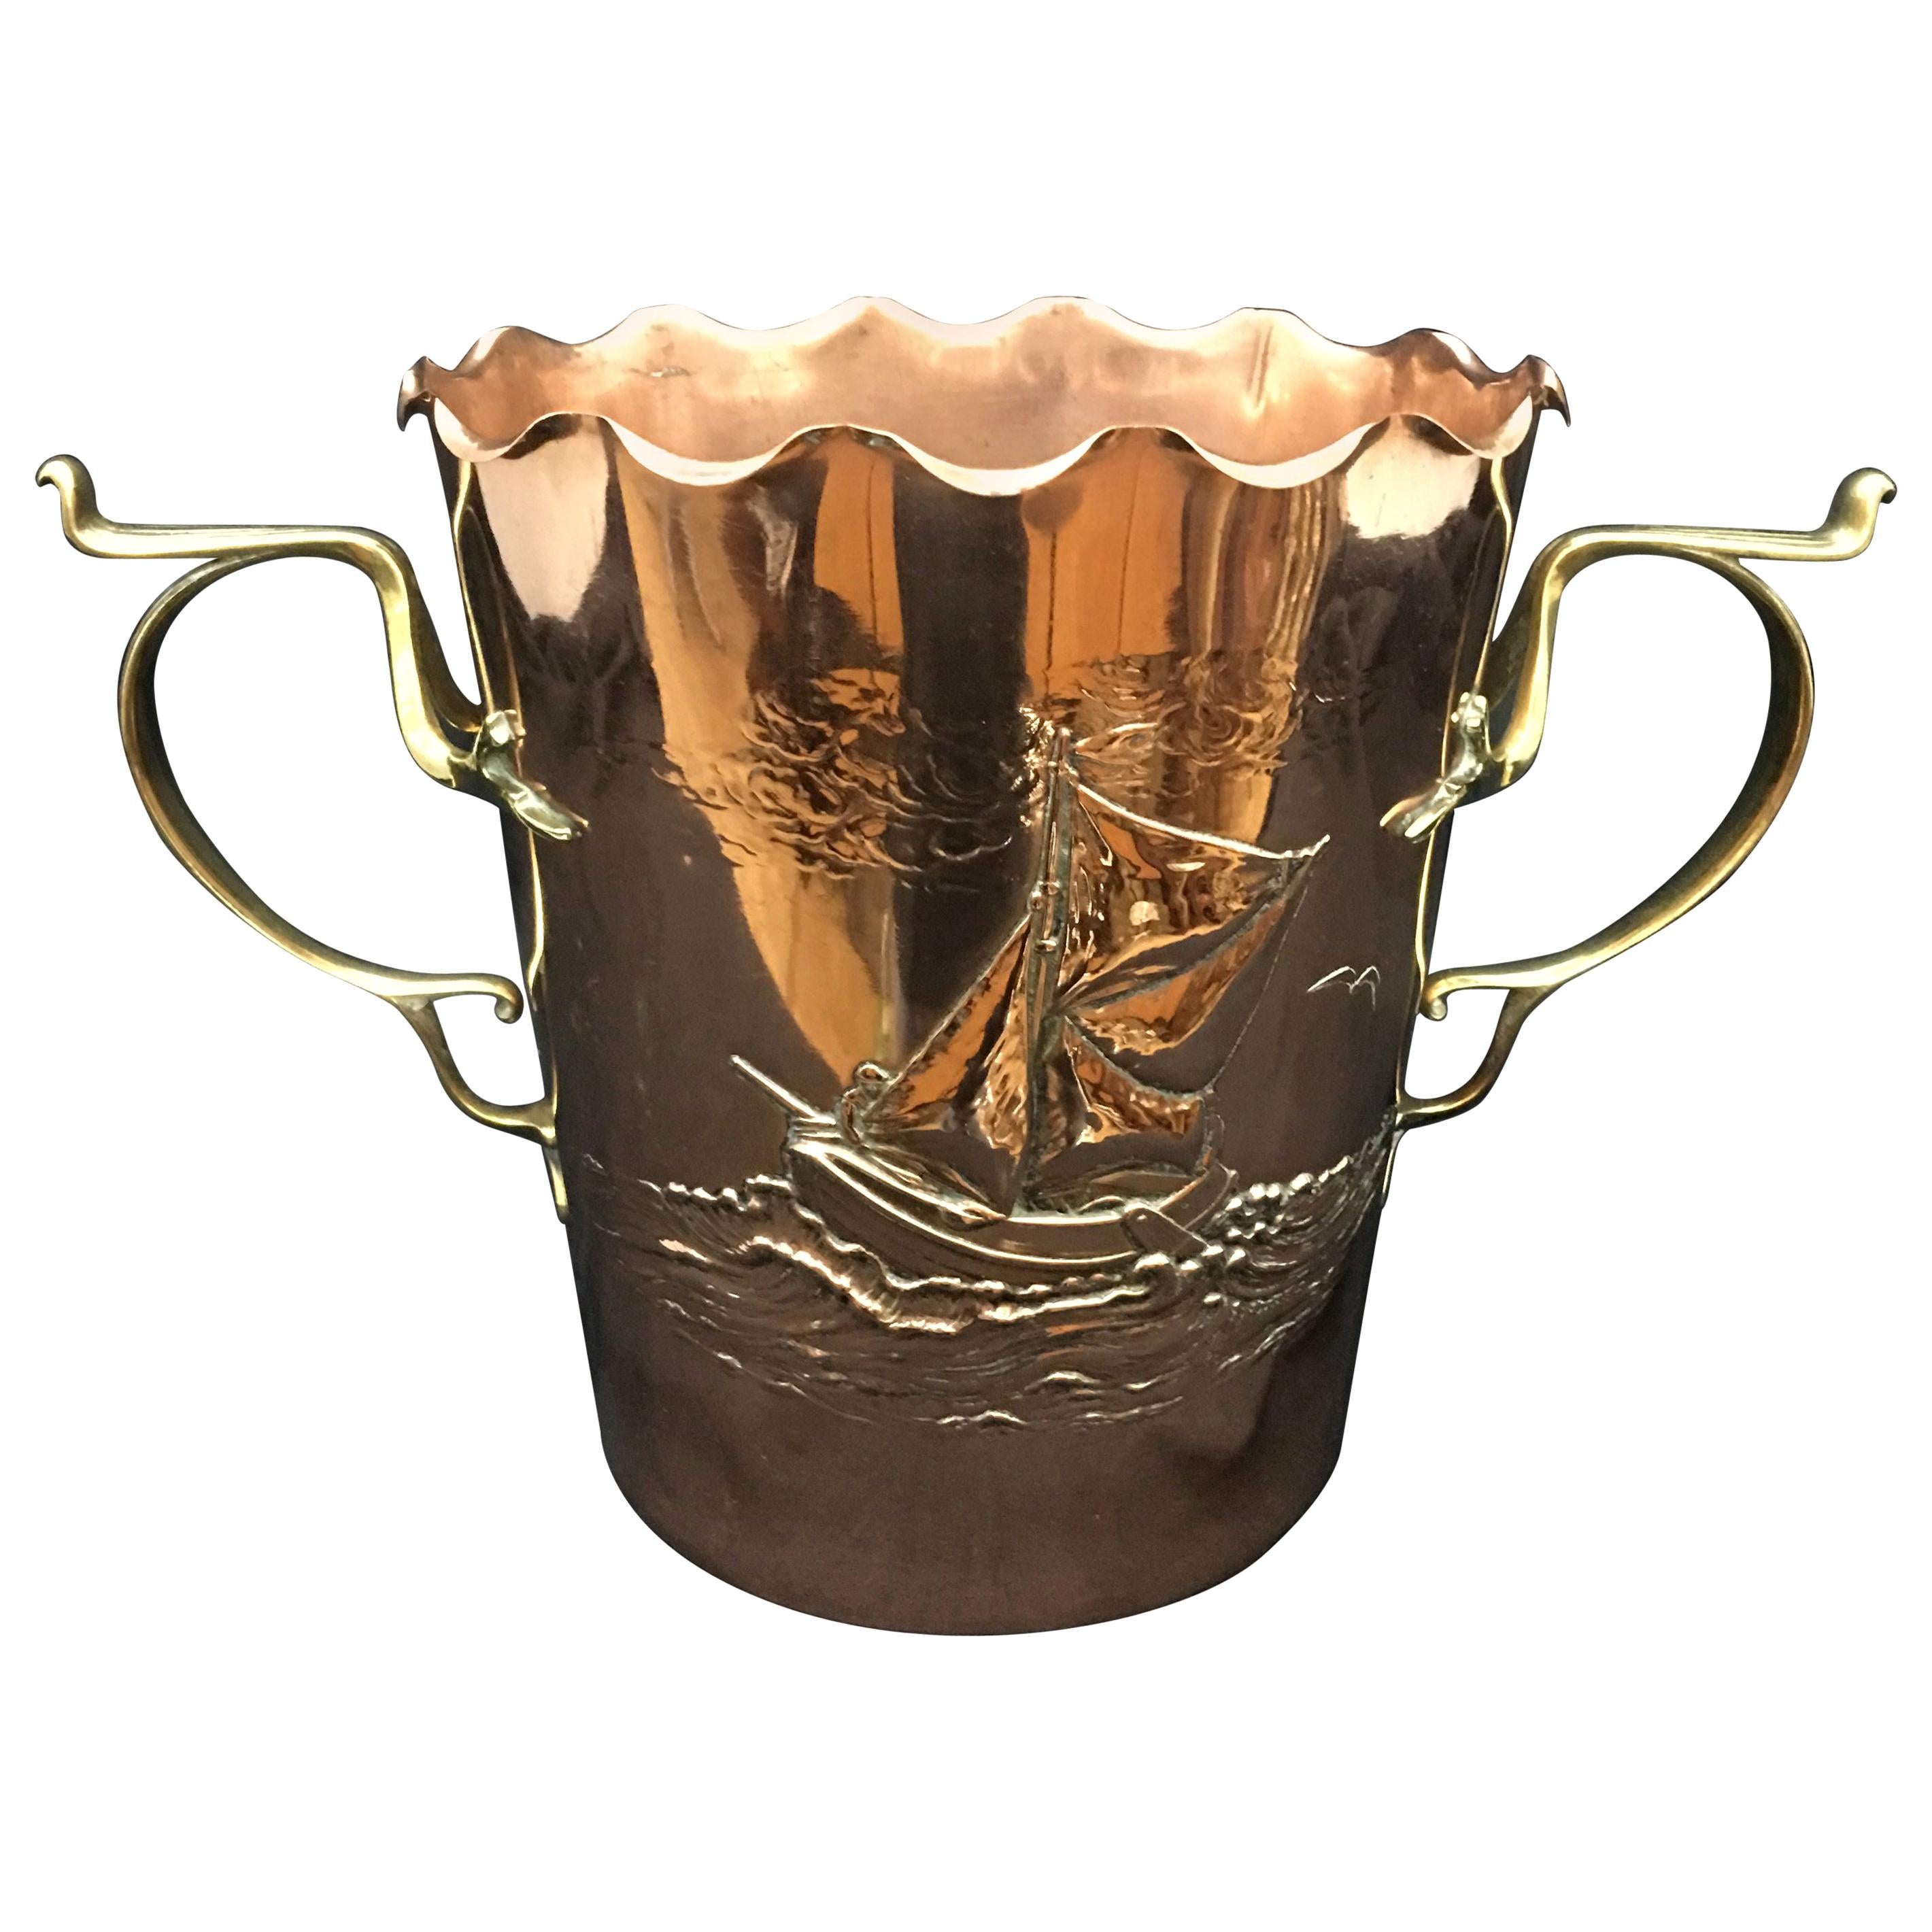 Art Nouveau Copper and Brass Wine Cooler by Carl Deffner, circa 1900